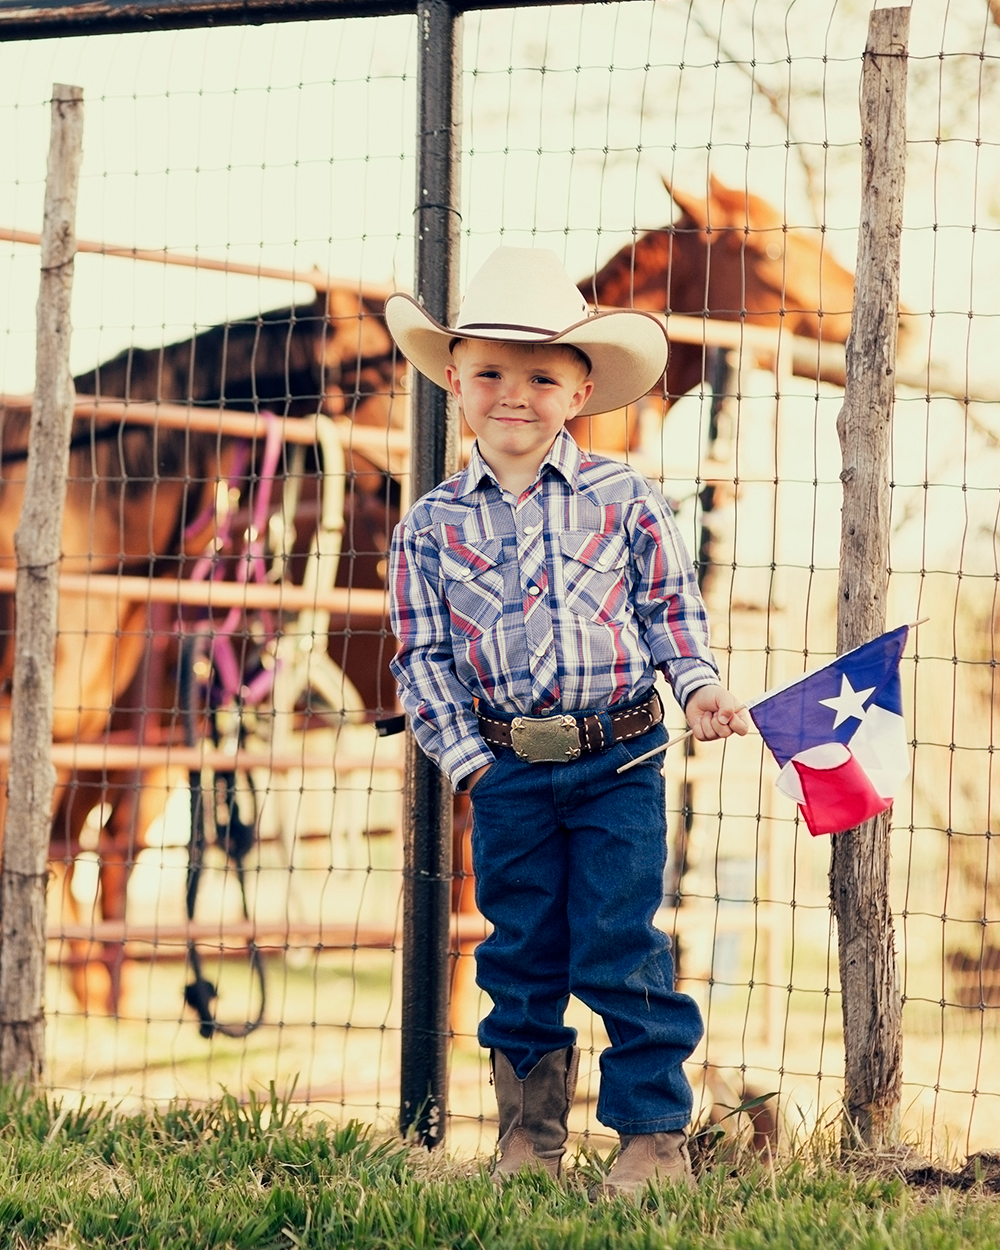 HCSC- A young cowboy is proud to display the flag of Texas.